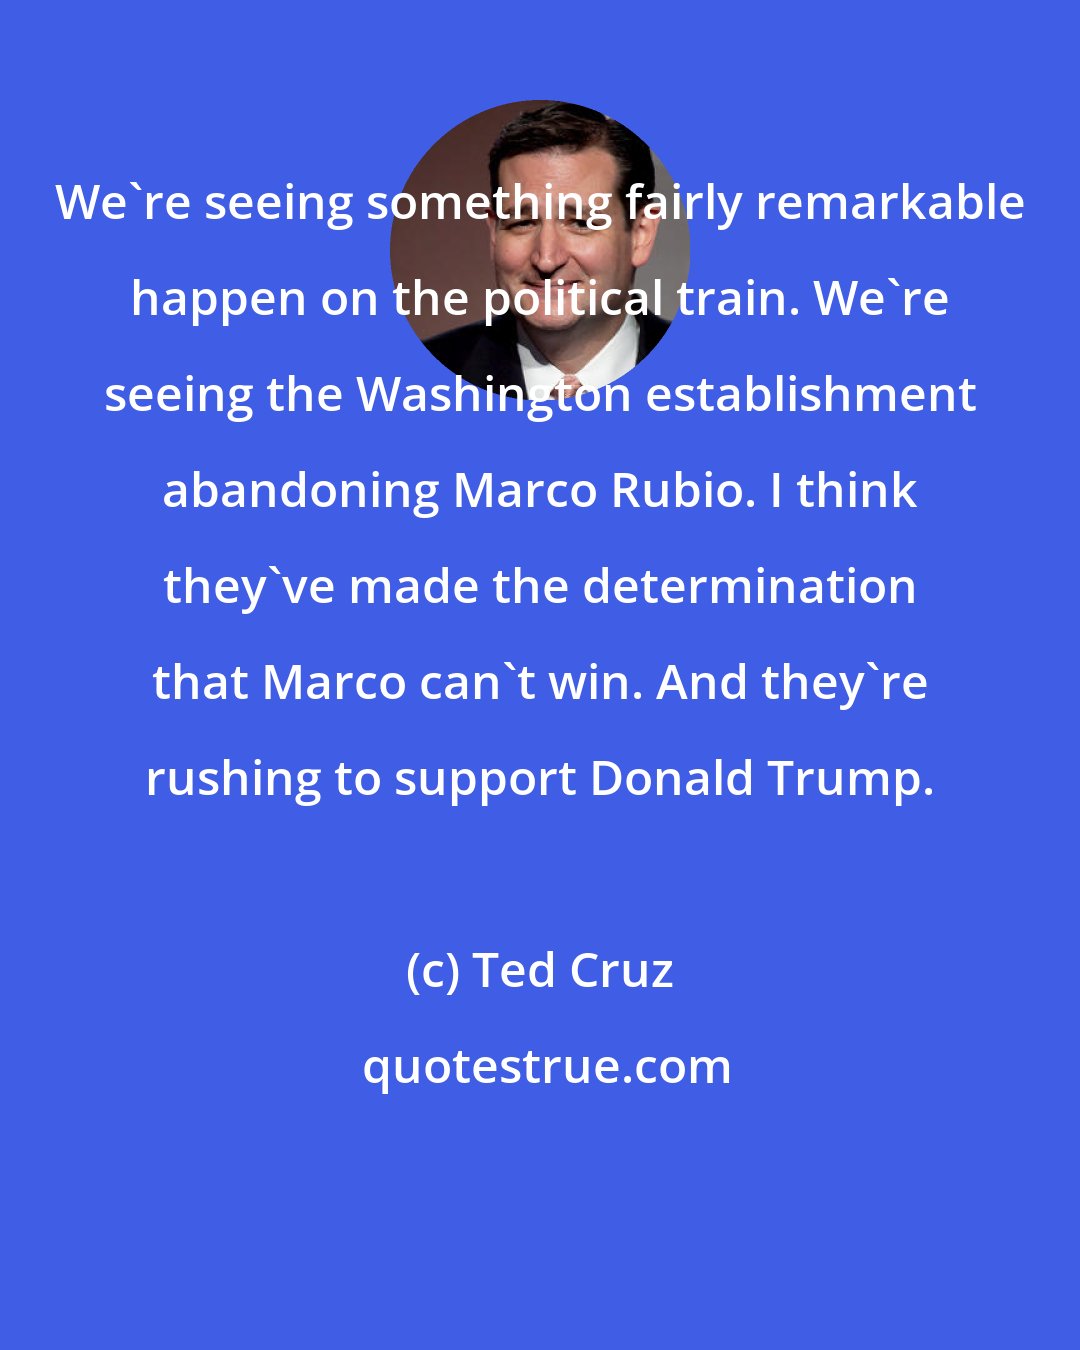 Ted Cruz: We`re seeing something fairly remarkable happen on the political train. We`re seeing the Washington establishment abandoning Marco Rubio. I think they`ve made the determination that Marco can`t win. And they`re rushing to support Donald Trump.